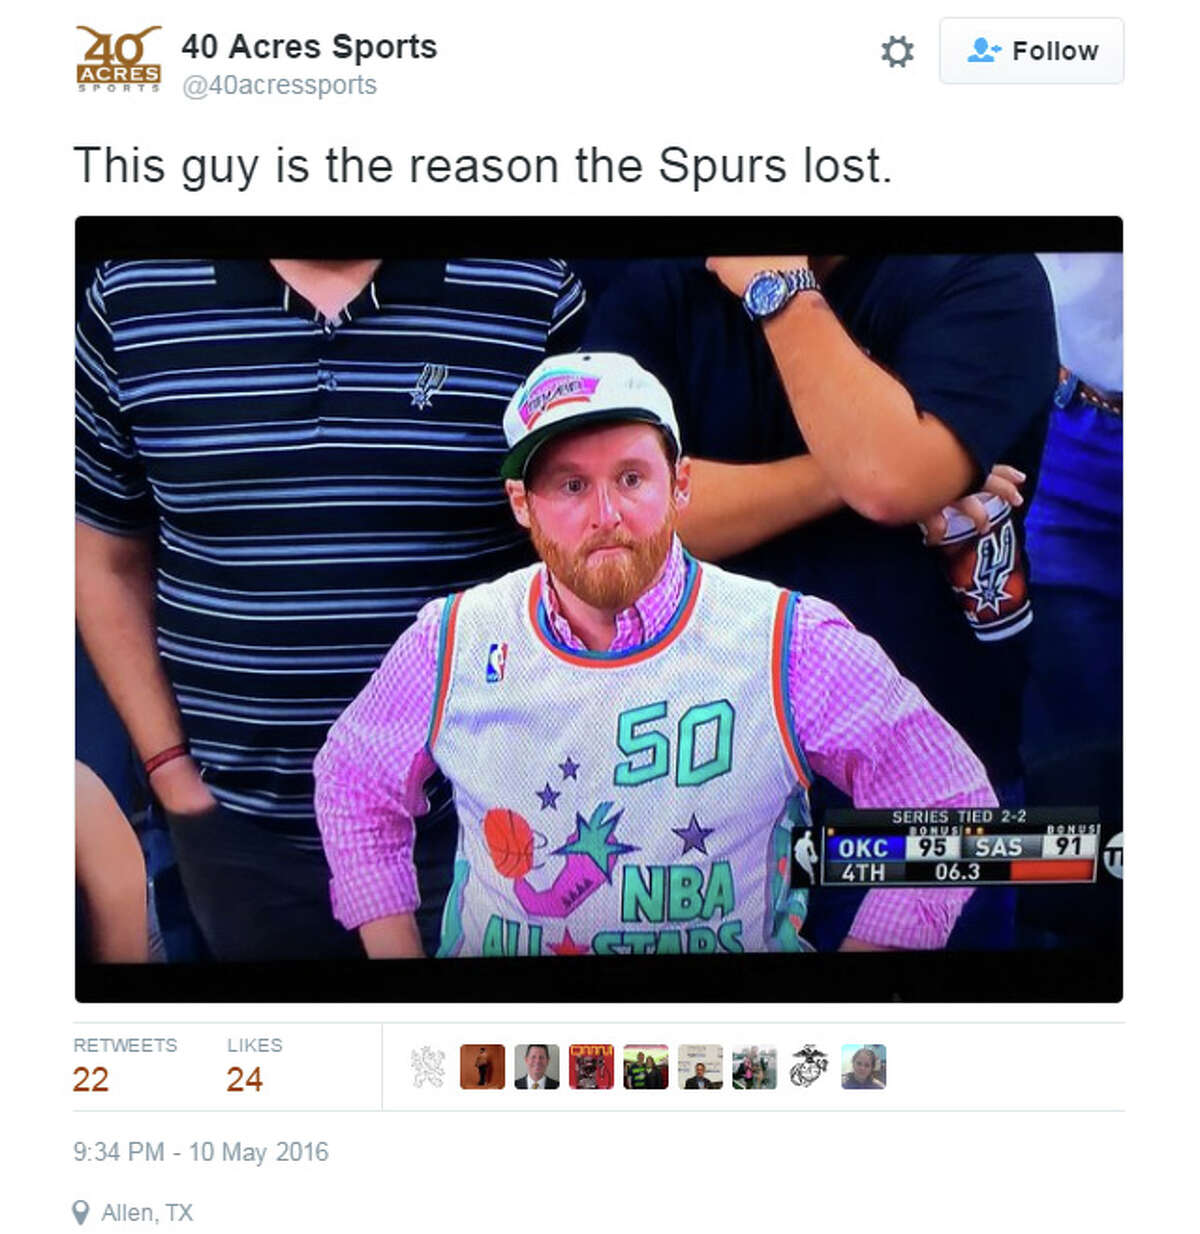 It's this guy's fault Maybe we should just stick to wearing silver and black.Tweet: "This guy is the reason the Spurs lost."